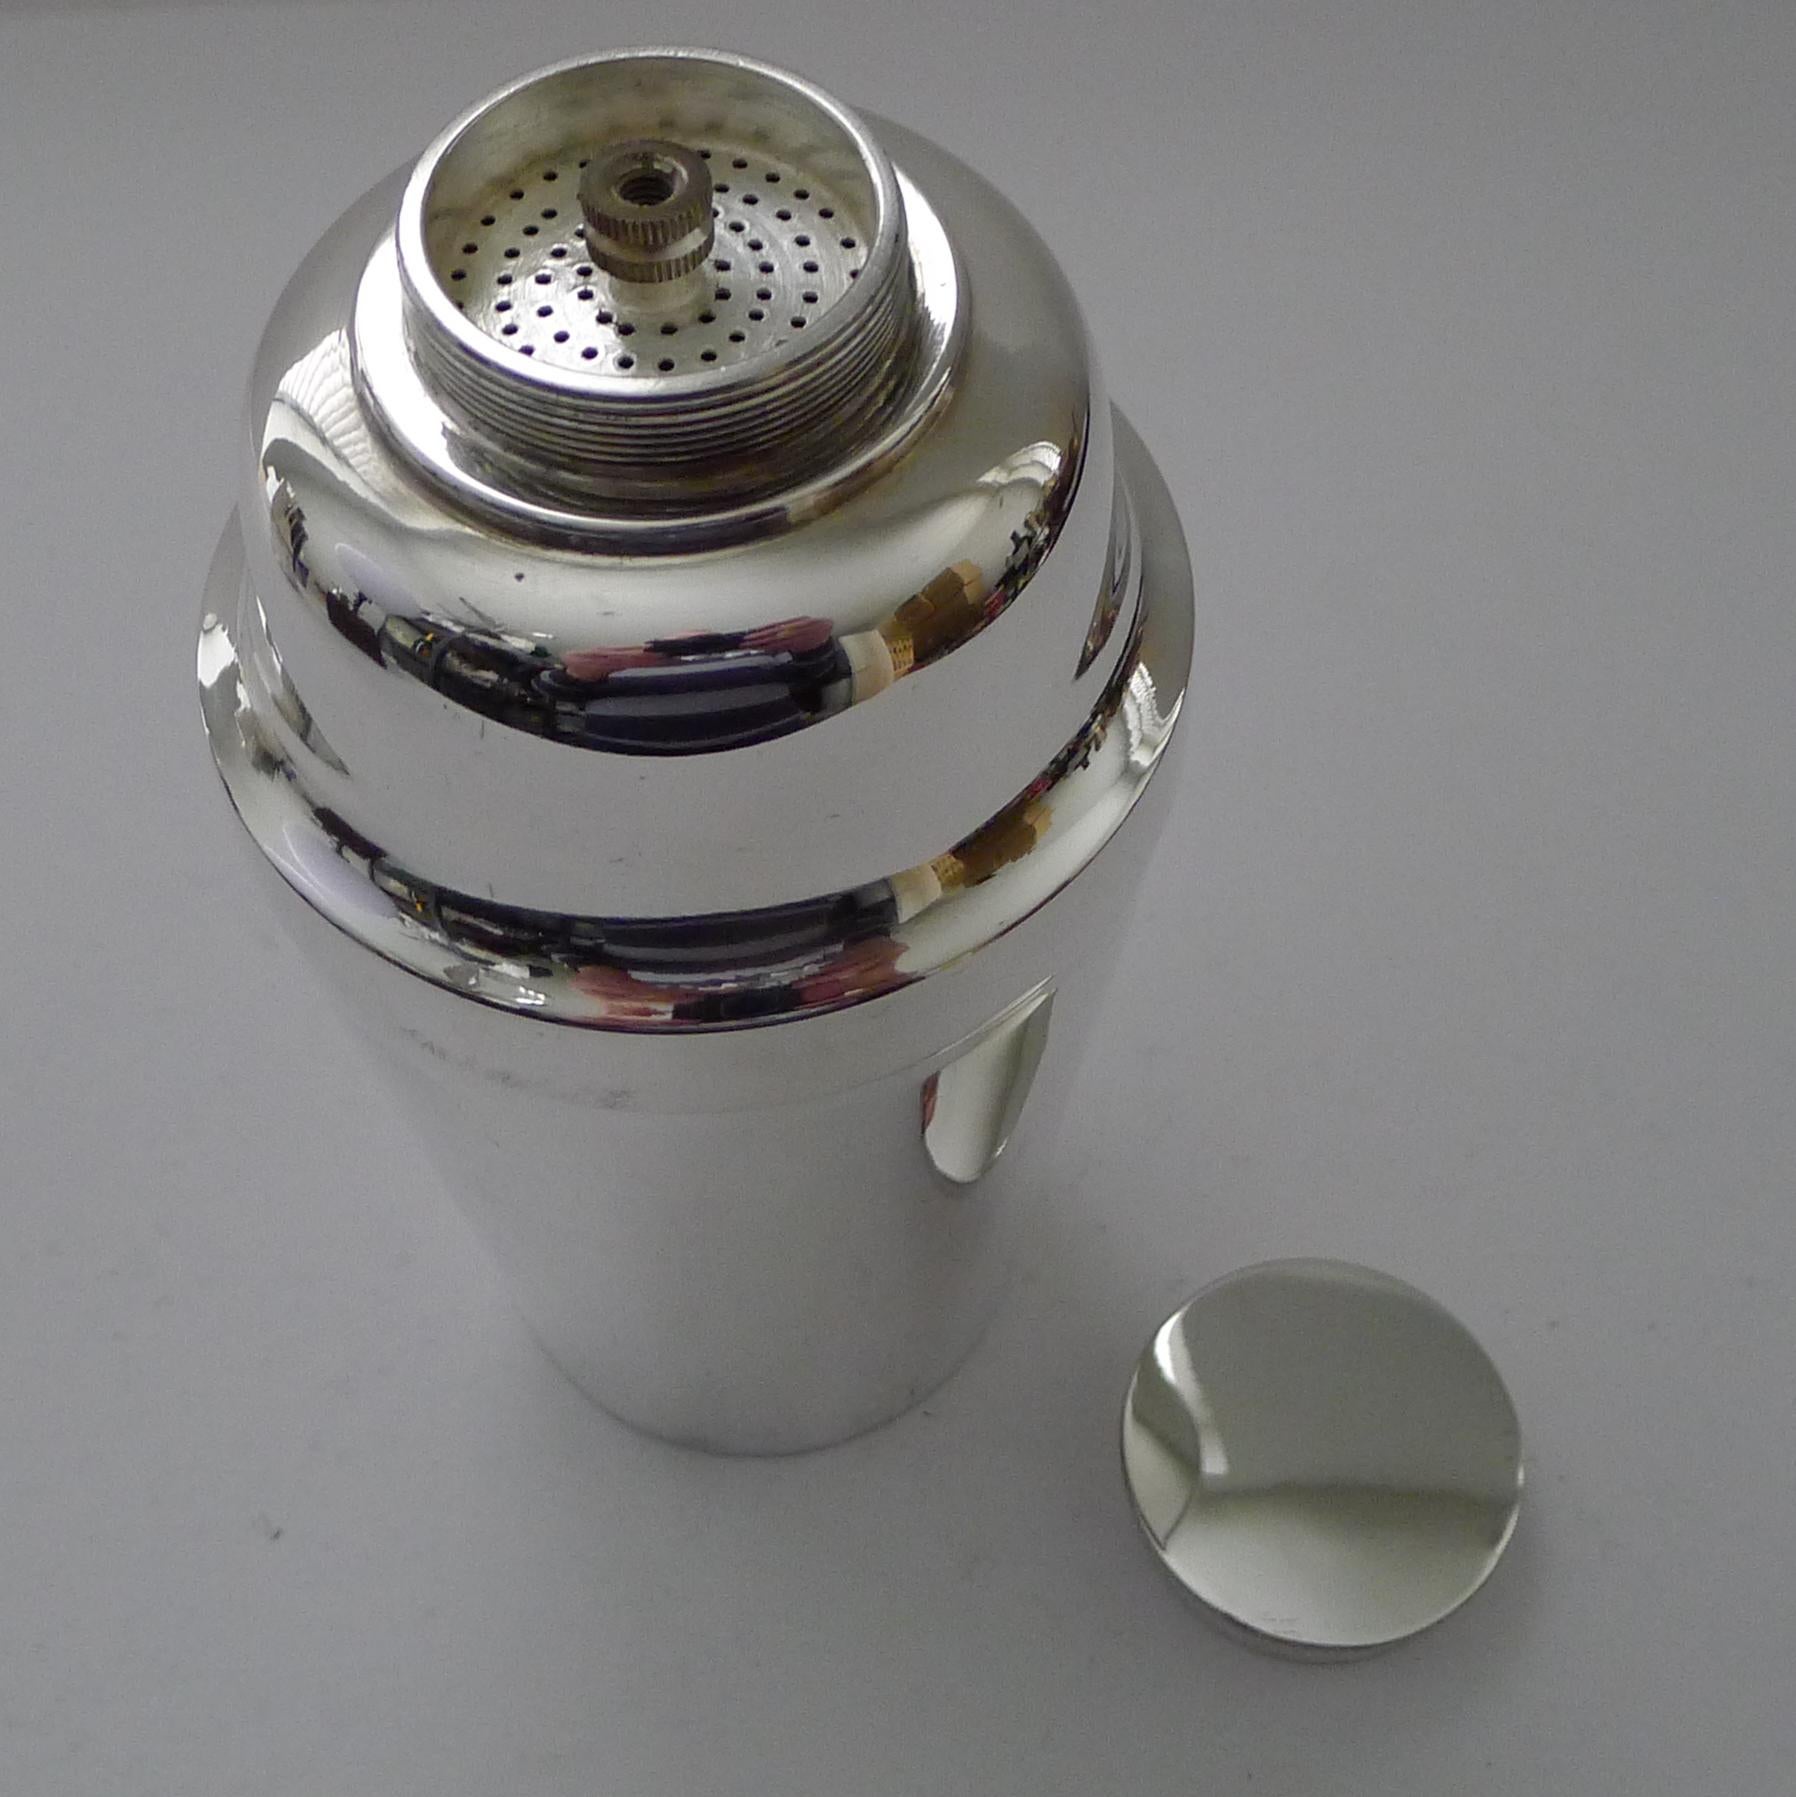 This is a lovely example of an English silver plated cocktail shaker, slightly more unusual in shape with the flattened screw-top rather than the usual pull-off cap.

Another unusual feature is the little instrument inside the lid leading to a